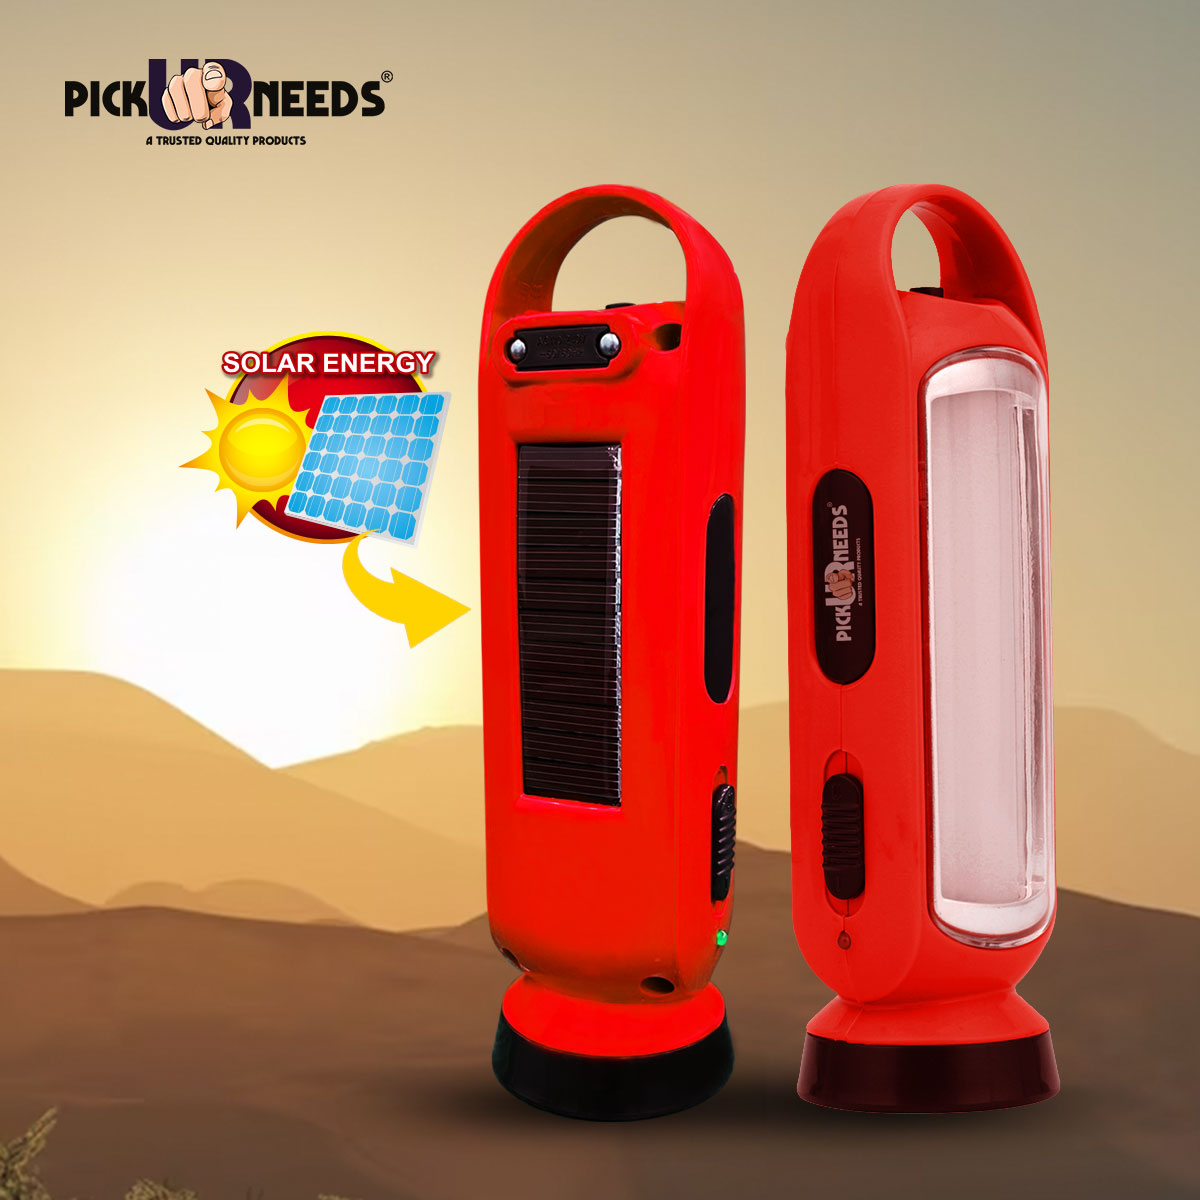 Pick Ur Needs 3 in 1 LED Solar Rechargeable Emergency Lantern Lamp Torch Light 4 hrs Torch Light